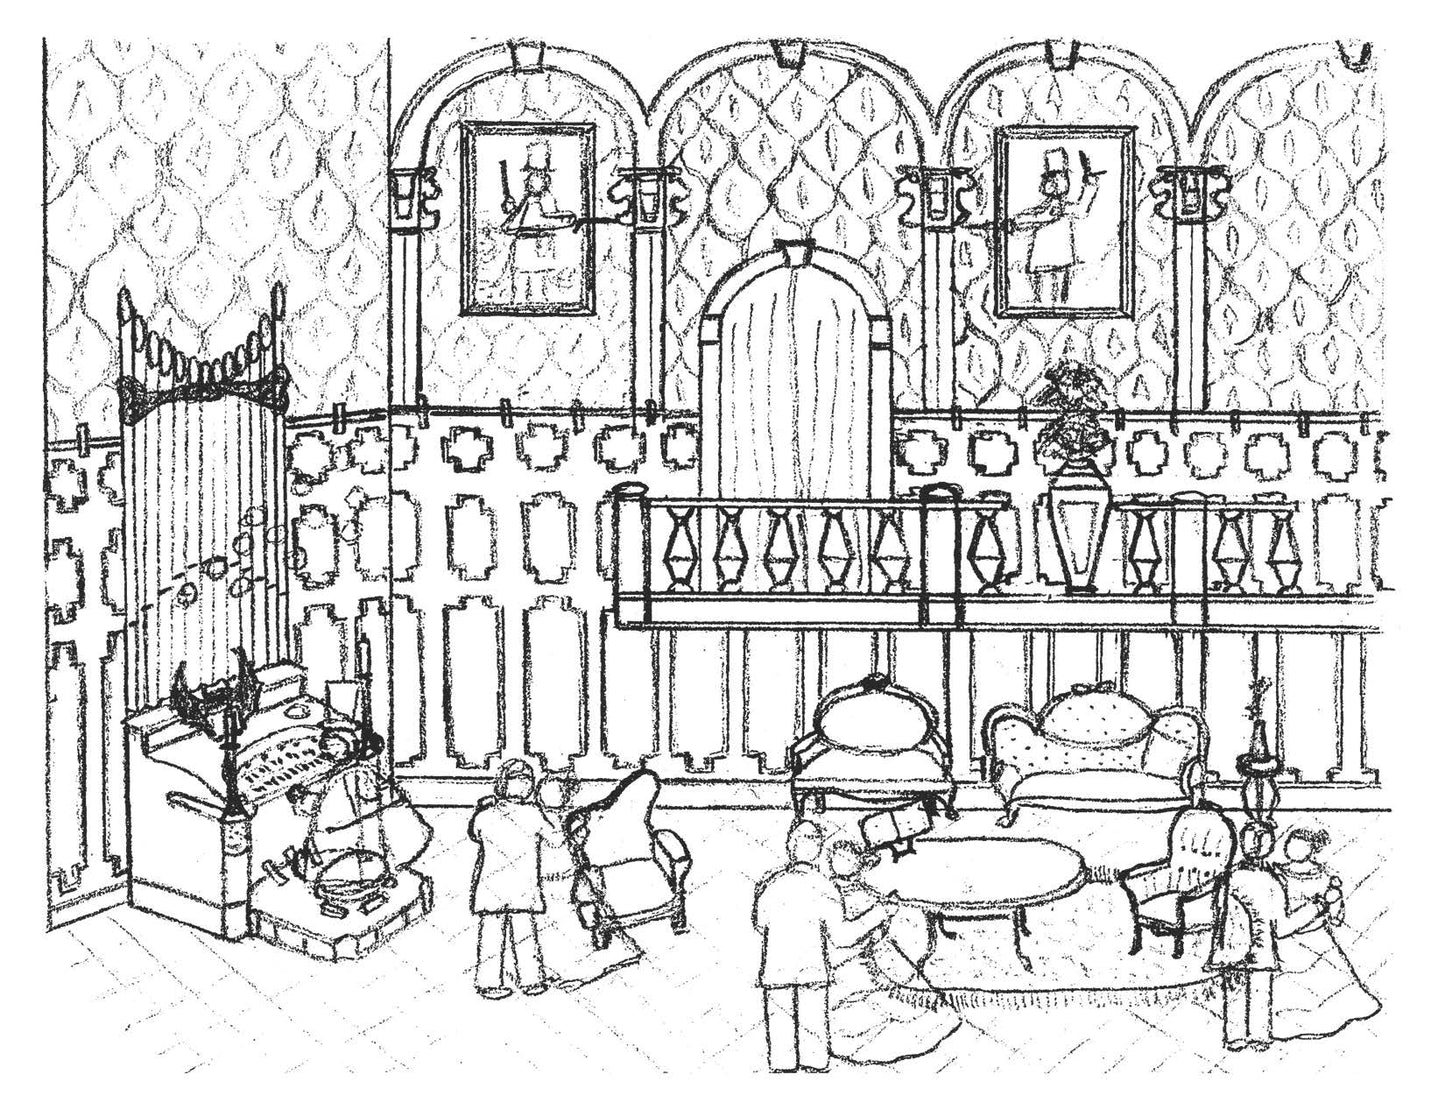 "Haunted Mansion" Tiny Coloring Book Digital Download by Jaime Tiny Themepark Art